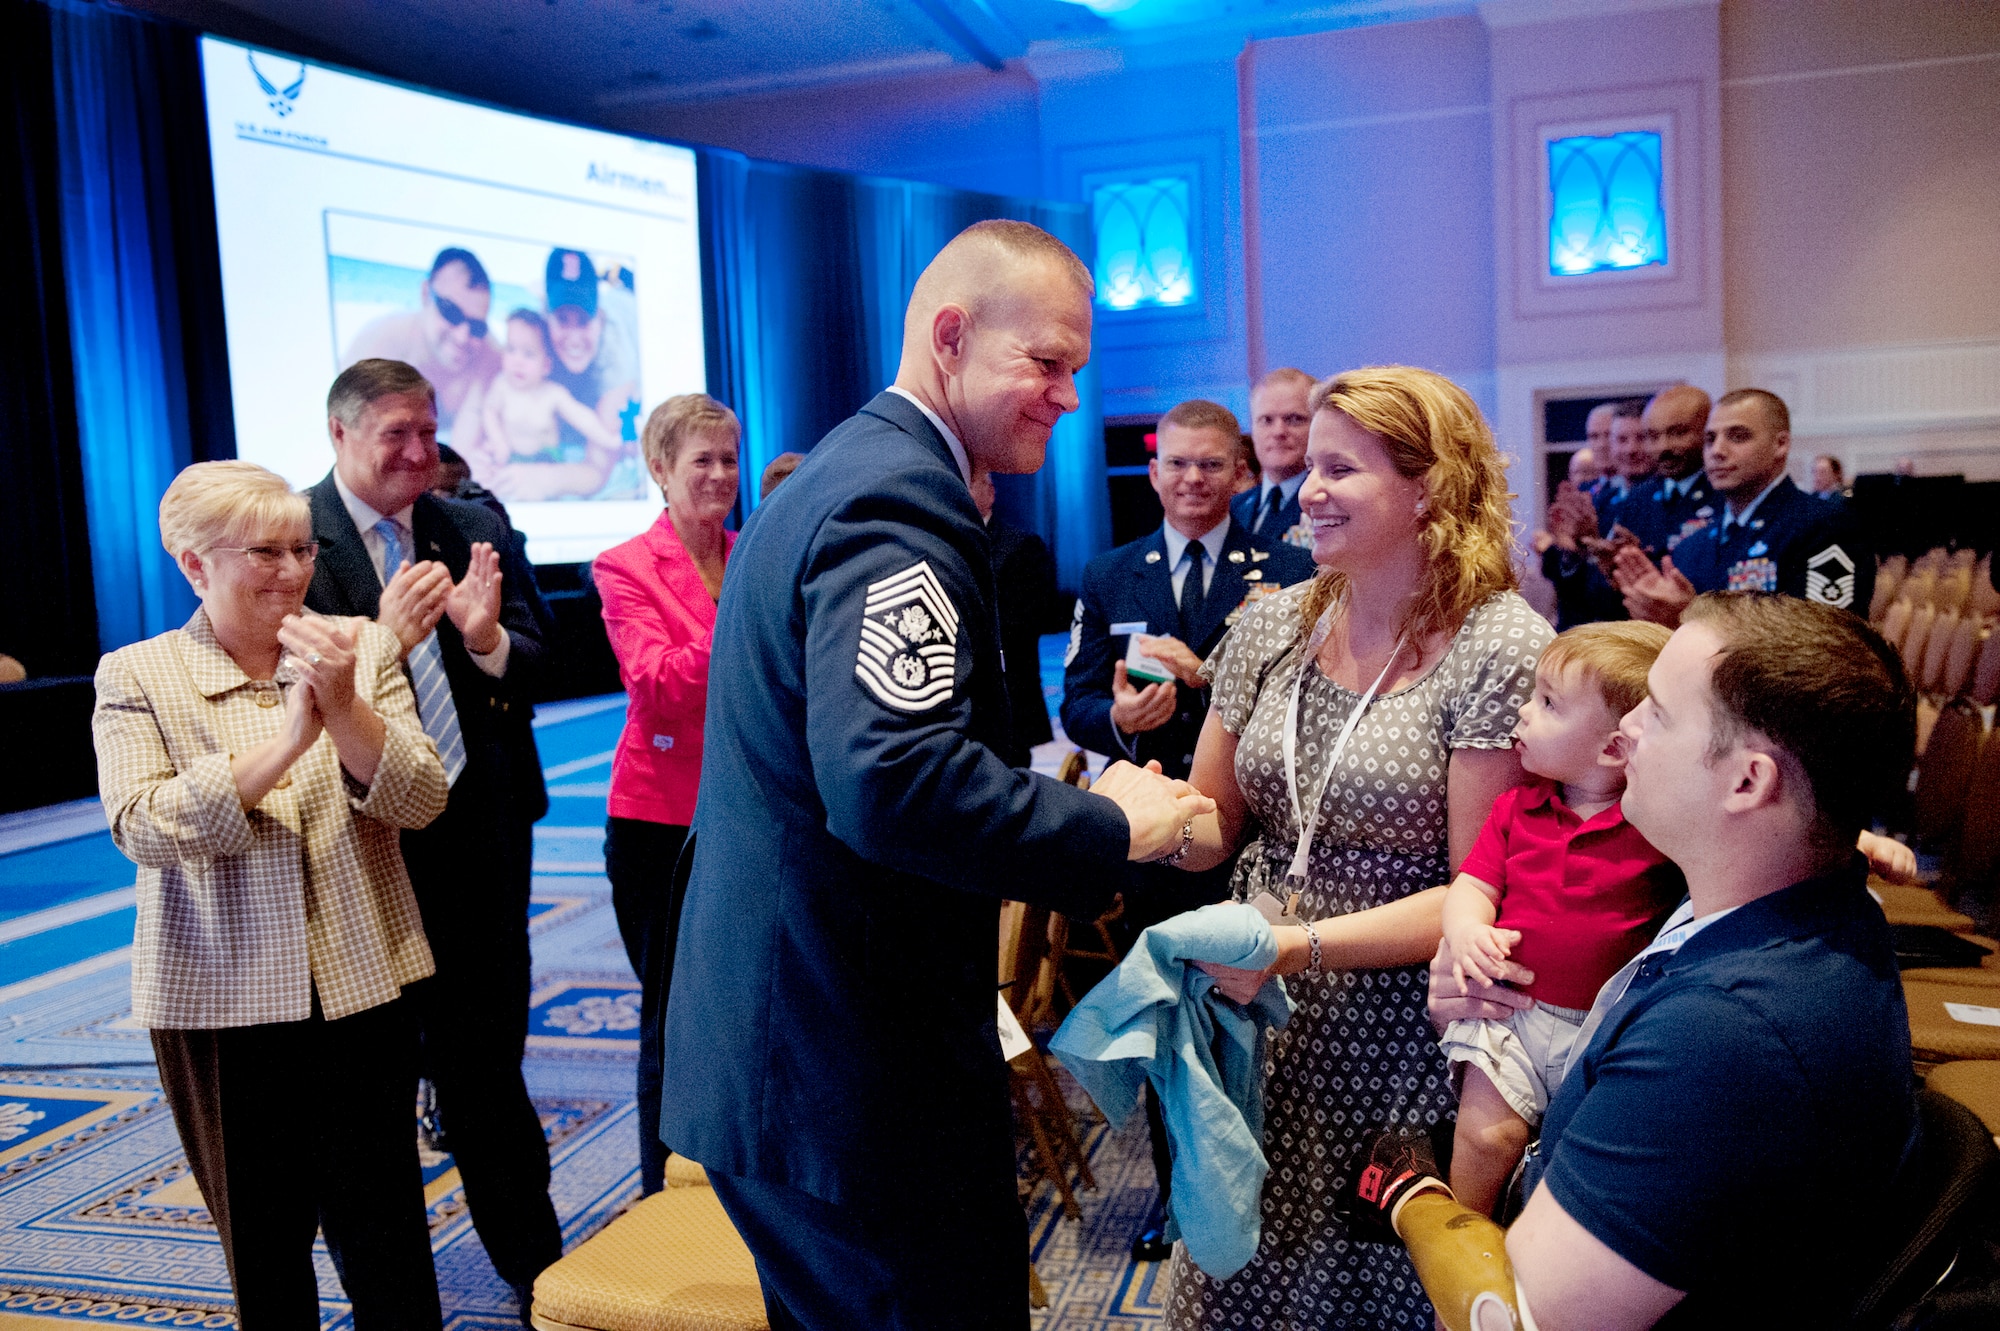 Chief Master Sgt. of the Air Force James A. Roy, center, greets Tech. Sgt. Joe Deslauriers, right, his son, Cameron, and wife, Lisa, during the enlisted call of the Air Force Association's Air and Space Conference and Technology Exposition in Washington, Sept. 19, 2012. Deslauriers, who is an explosives ordnance technician assigned to the 1st Special Operations Civil Engineer Squadron, Hurlburt, Fla., lost both legs in Afghanistan last year. To the left is Paula Roy; wife of CMSAF Roy; Secretary of the Air Force Michael B. Donley and his wife, Gail. (U.S. Air Force photo by Val Gempis)